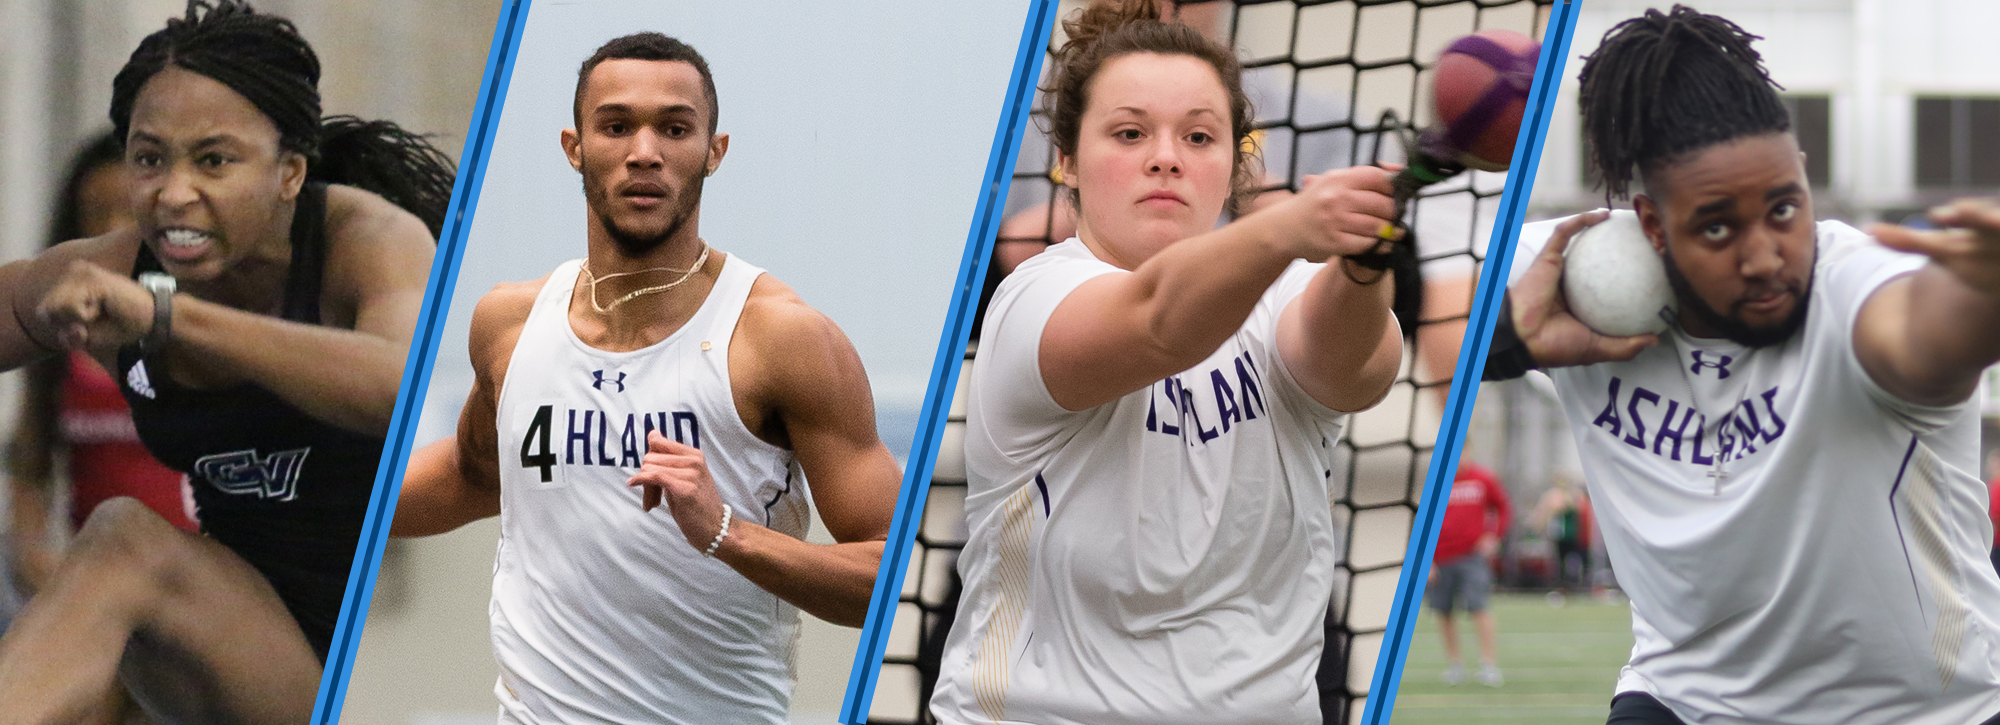 Ashland's Pringle, Helenthal and Hill, and GVSU's Wiggins are Week 5 track and field top athletes